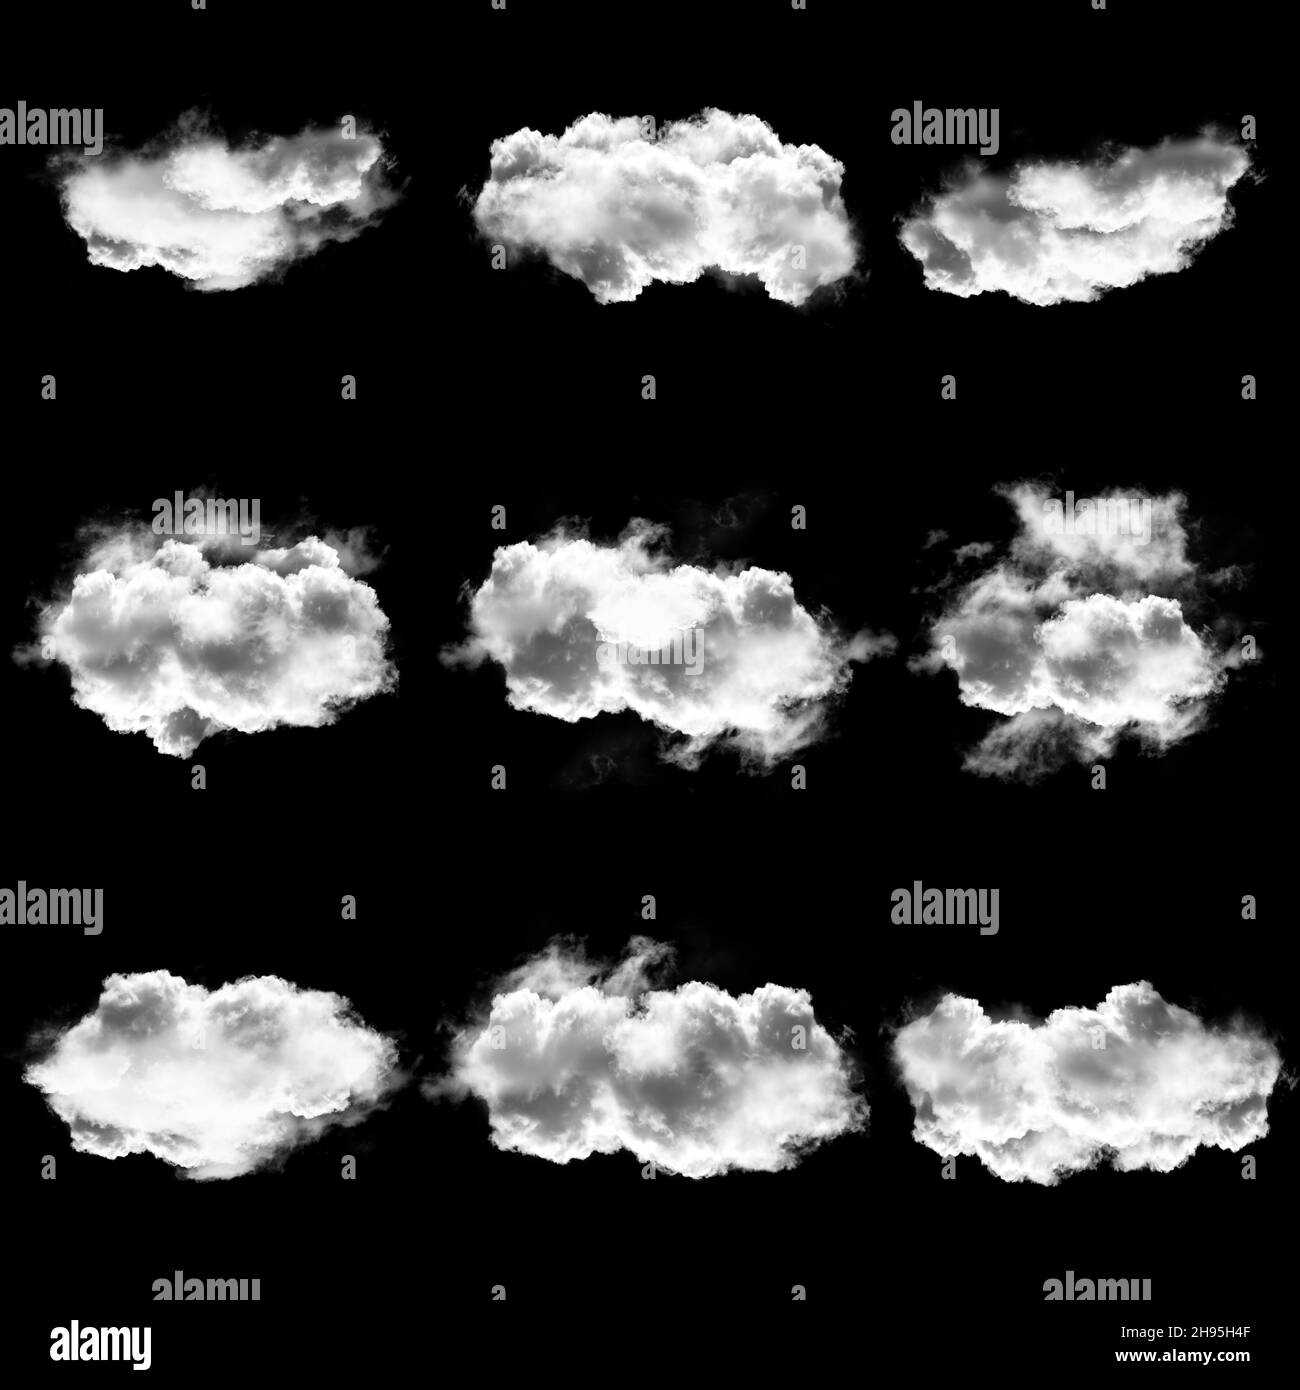 Clouds illustration Black and White Stock Photos & Images - Alamy